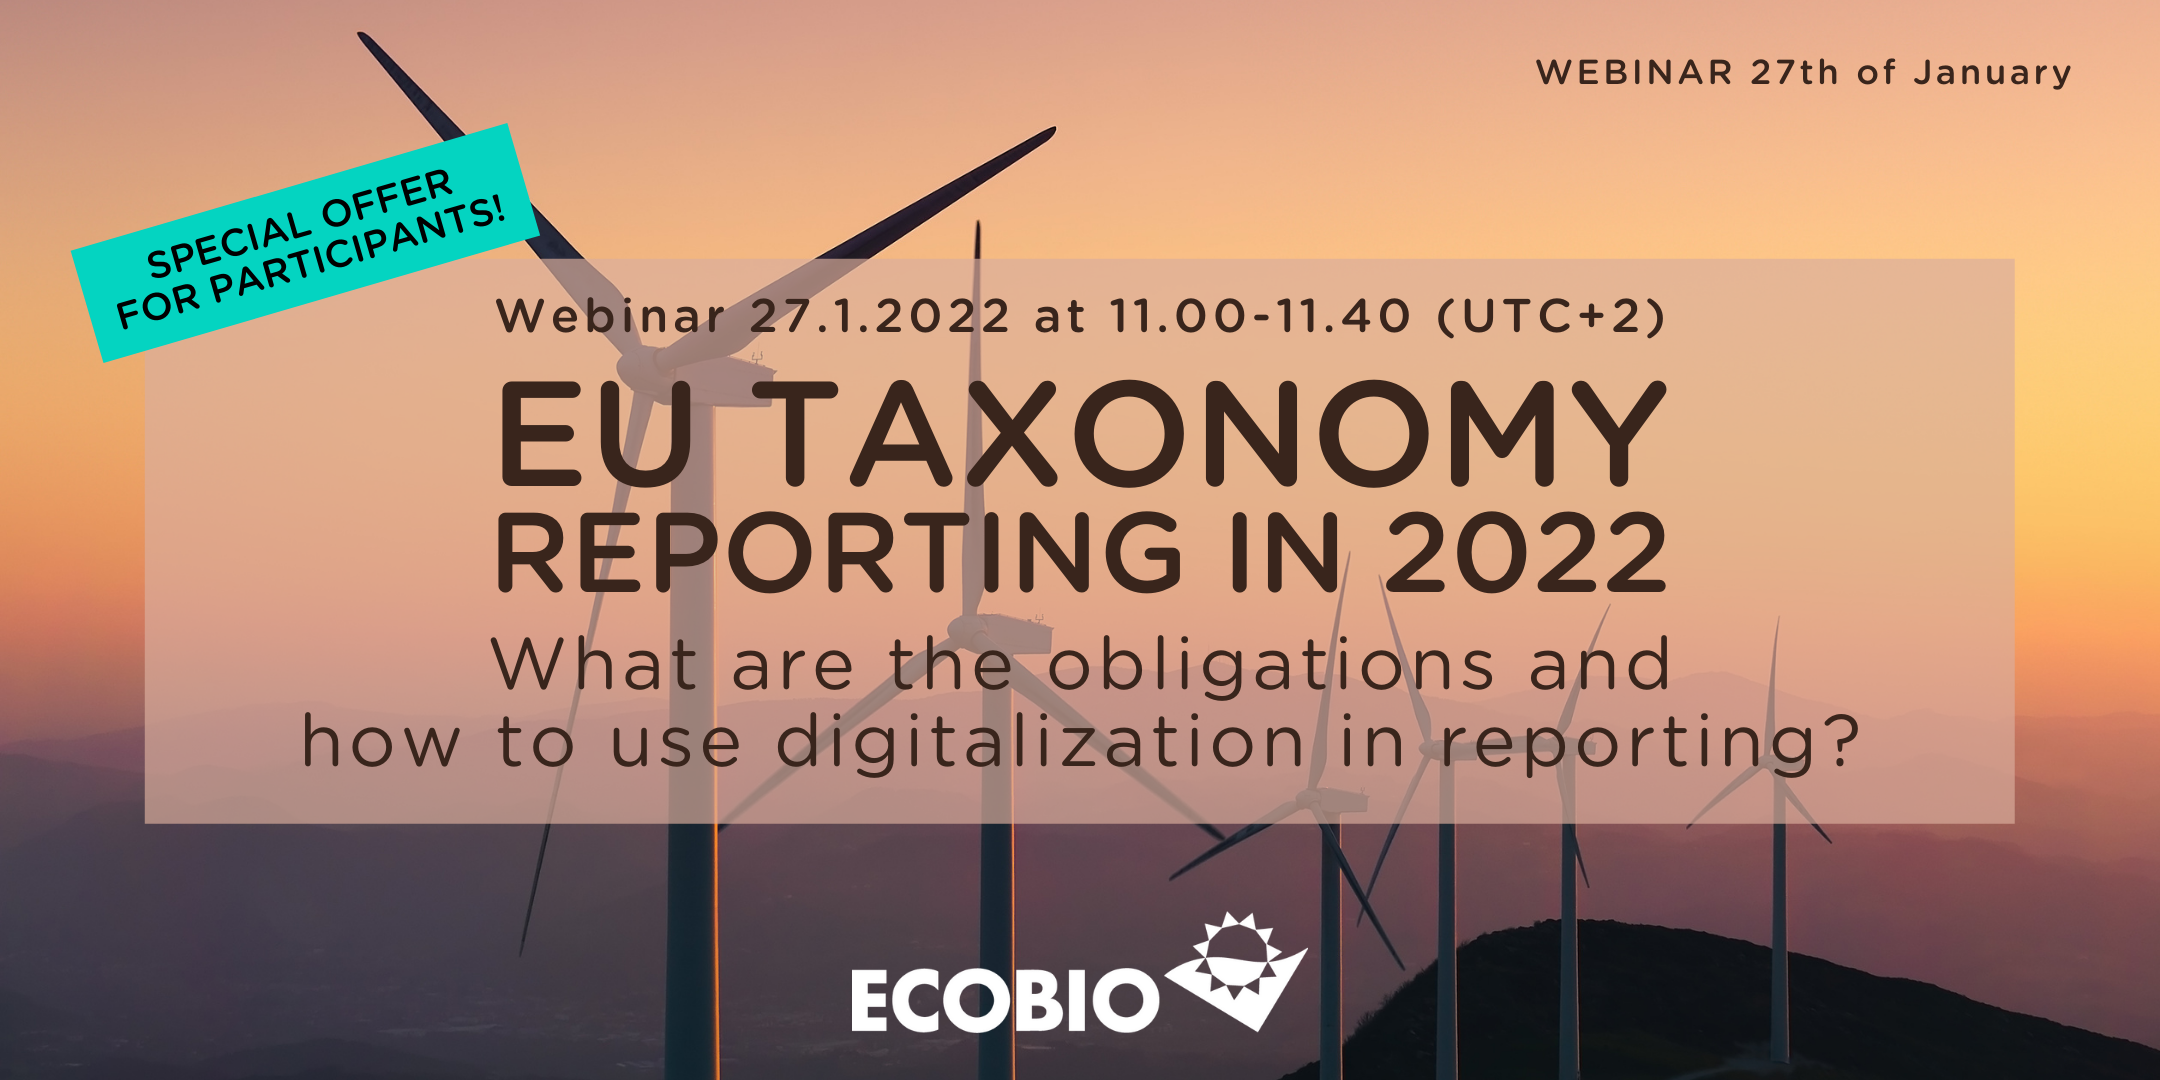 EU Taxonomy Reporting in 2022 - What are the obligations and how to use digitalization in reporting?